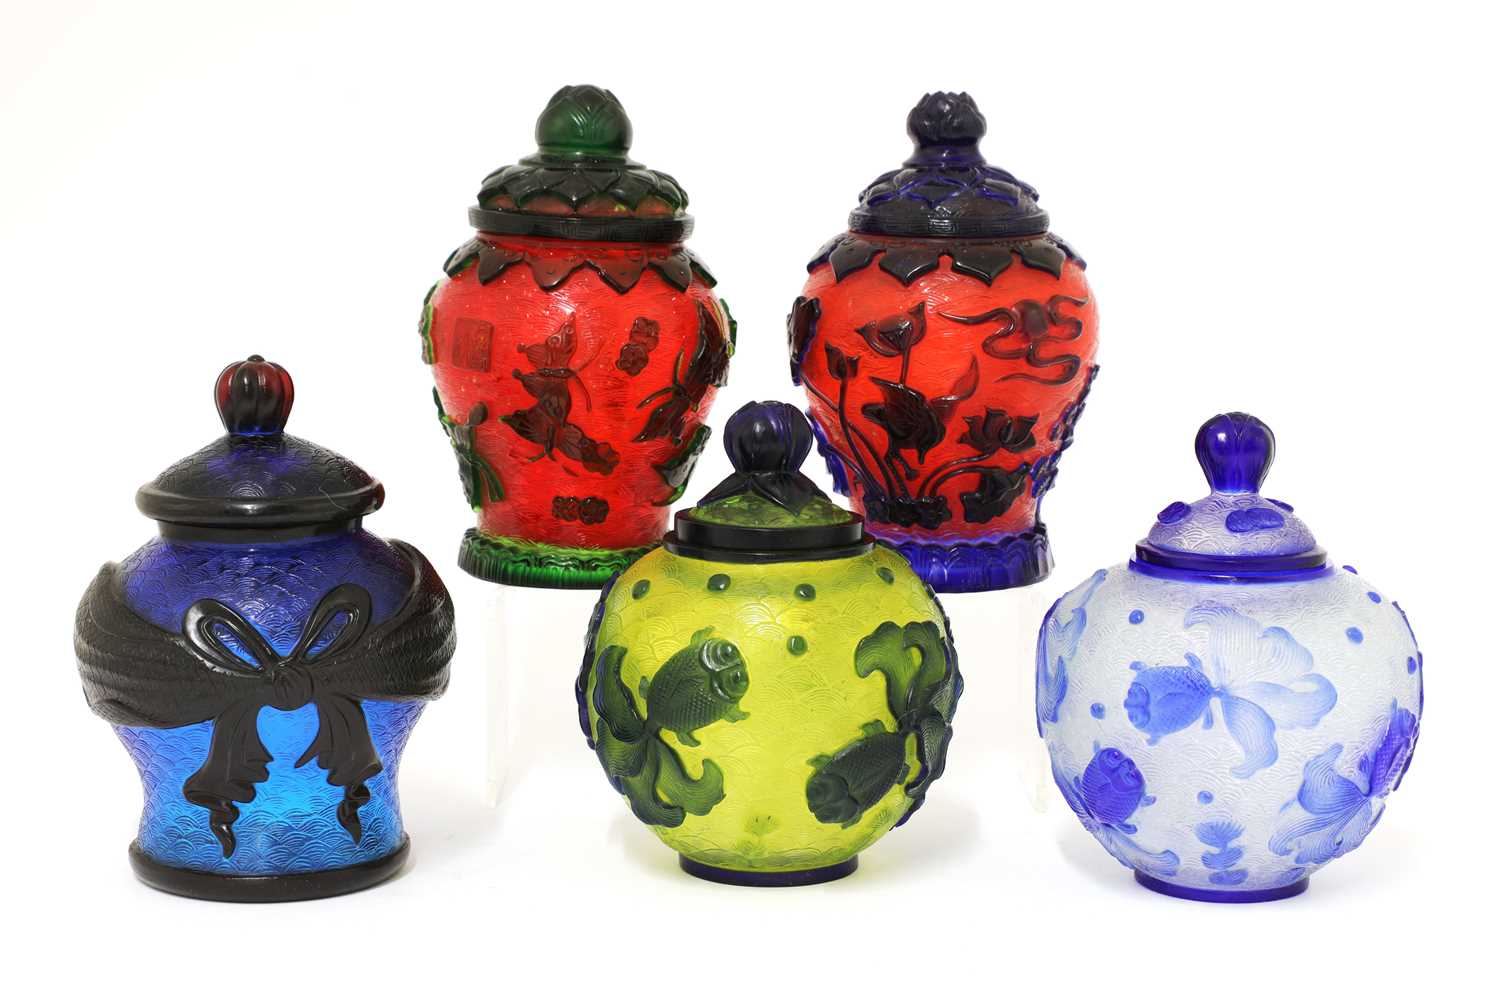 Lot 80 - A collection of five Chinese overlay Peking glass jars and covers